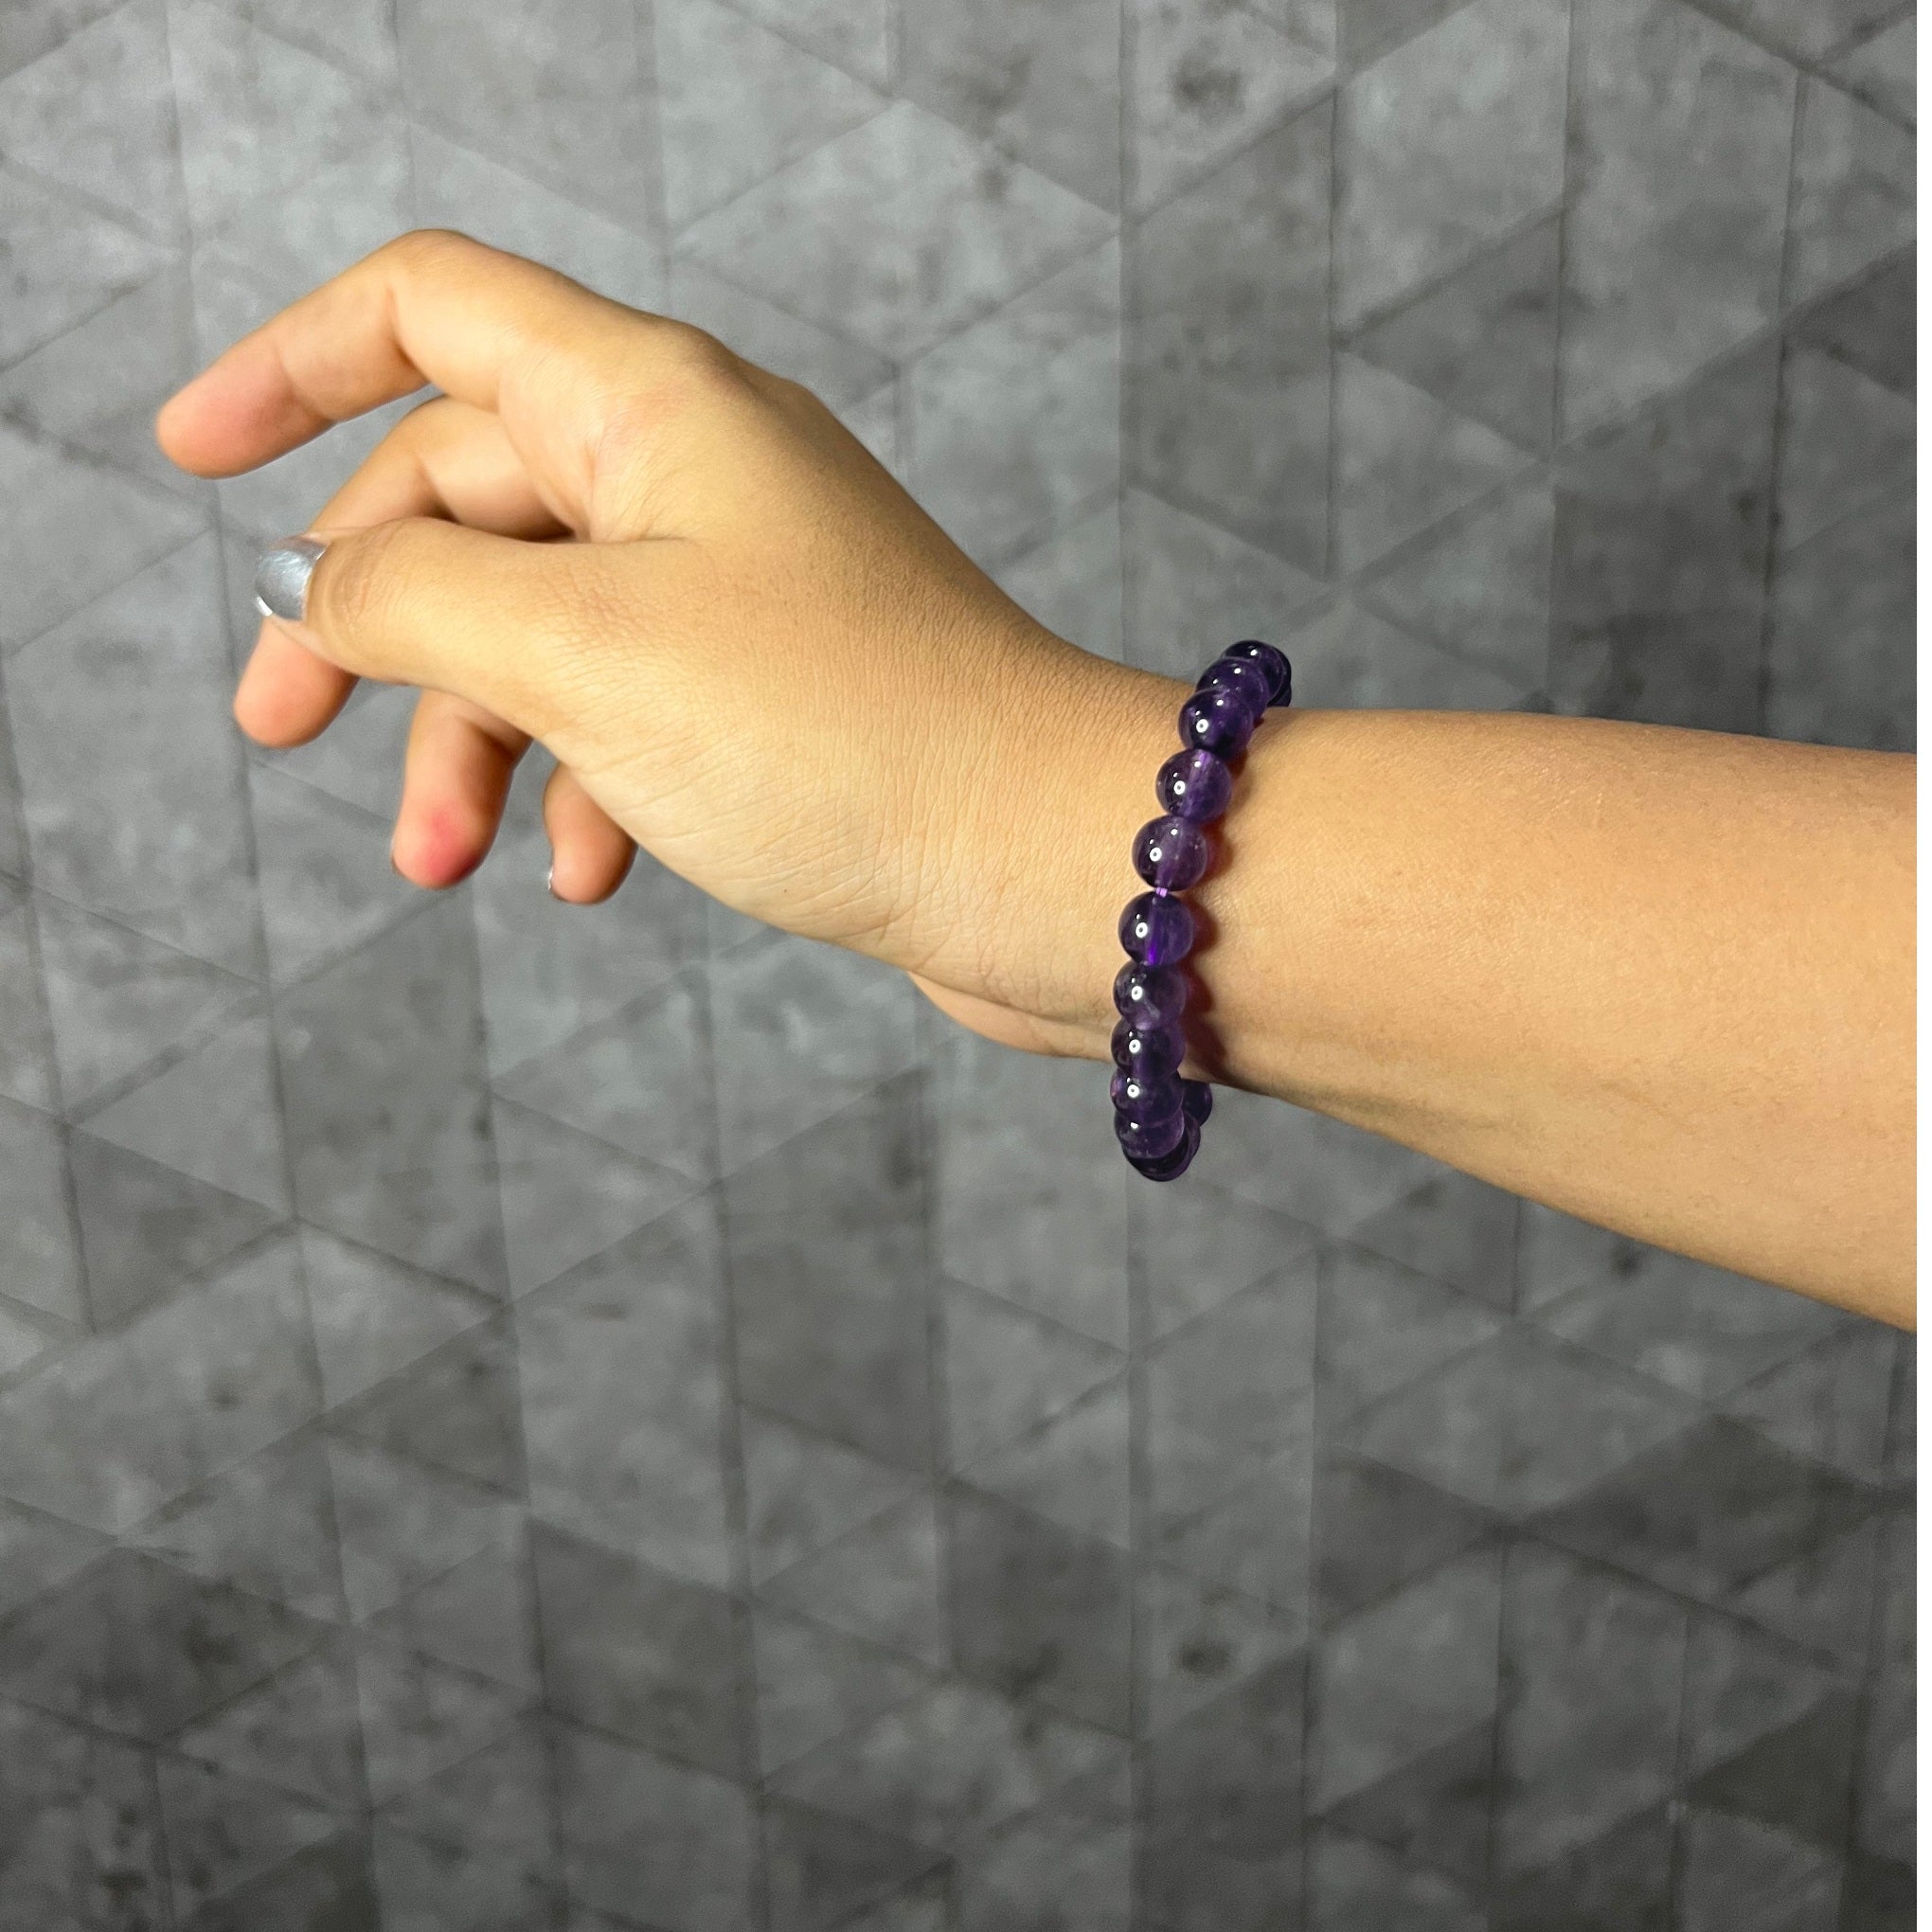 CERTIFIED AMETHYST CRYSTAL BRACELET- VIOLET PURPLE COLOUR MEDITATION HEALING ACCESSORY HOME OFFICE GIFT JEWELLERY